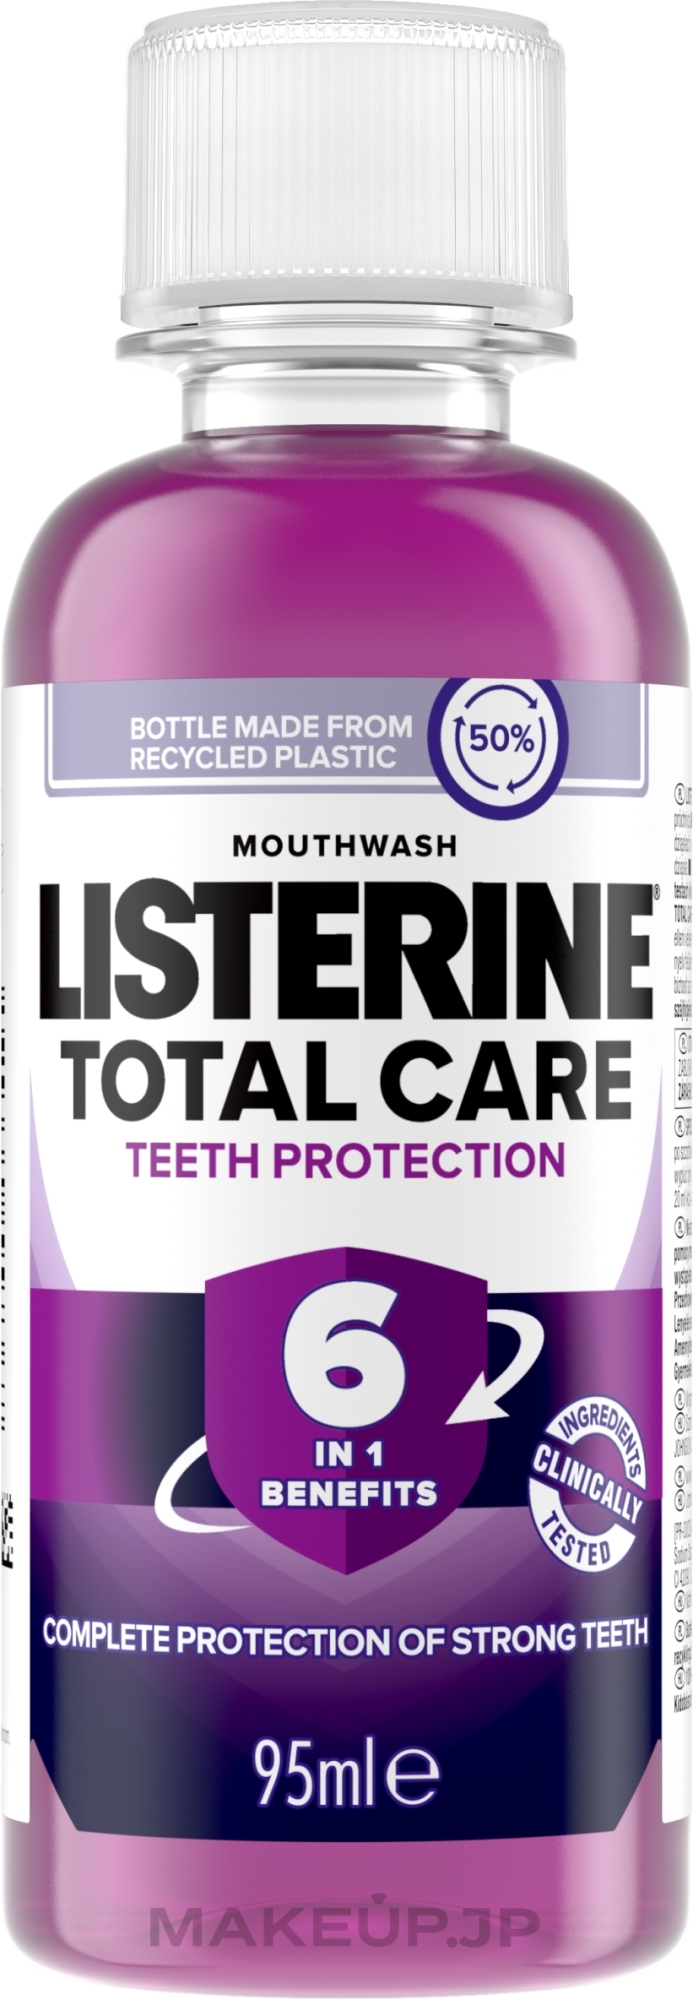 Mouthwash "6 in 1 Total Care" - Listerine Total Care — photo 95 ml